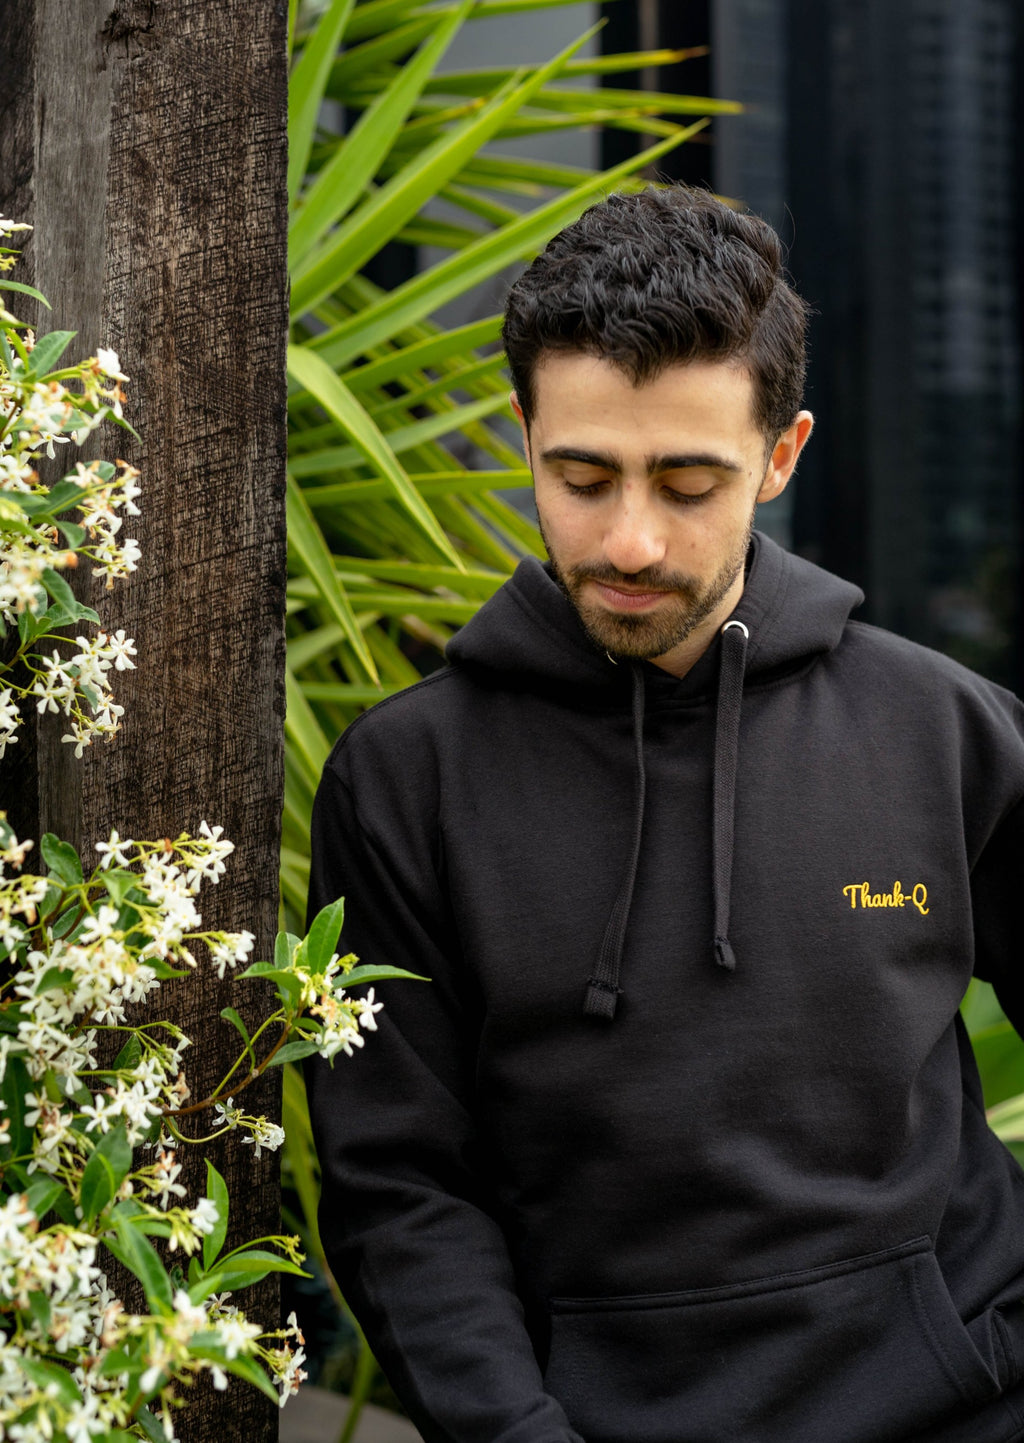 darren posing black thank-q embroidered hoodie in bushes